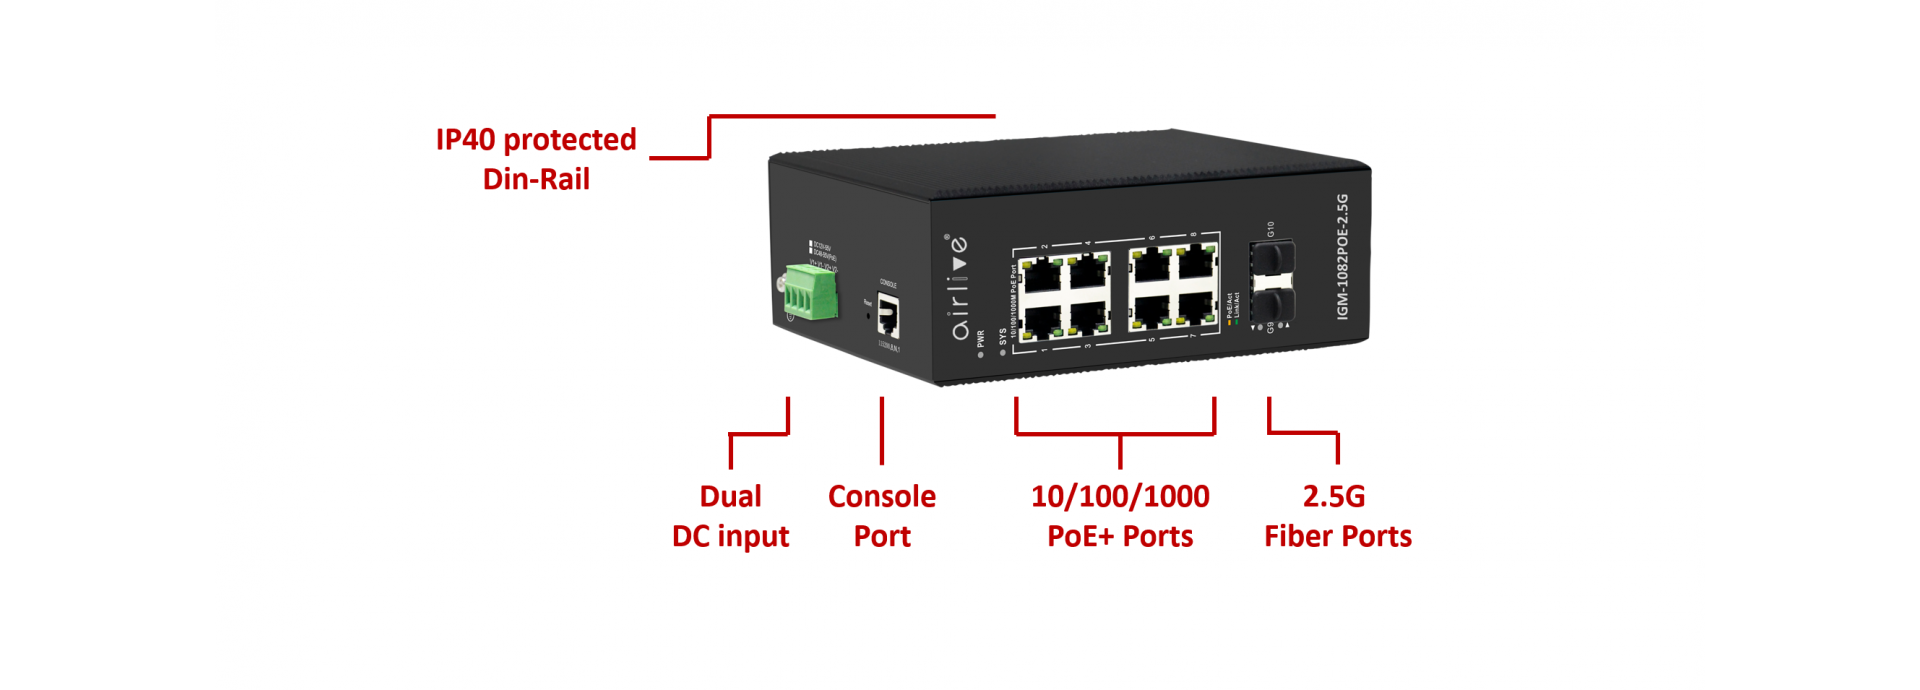 Reliable Industrial-grade Managed POE Switch for extreme environment with VLAN and QoS